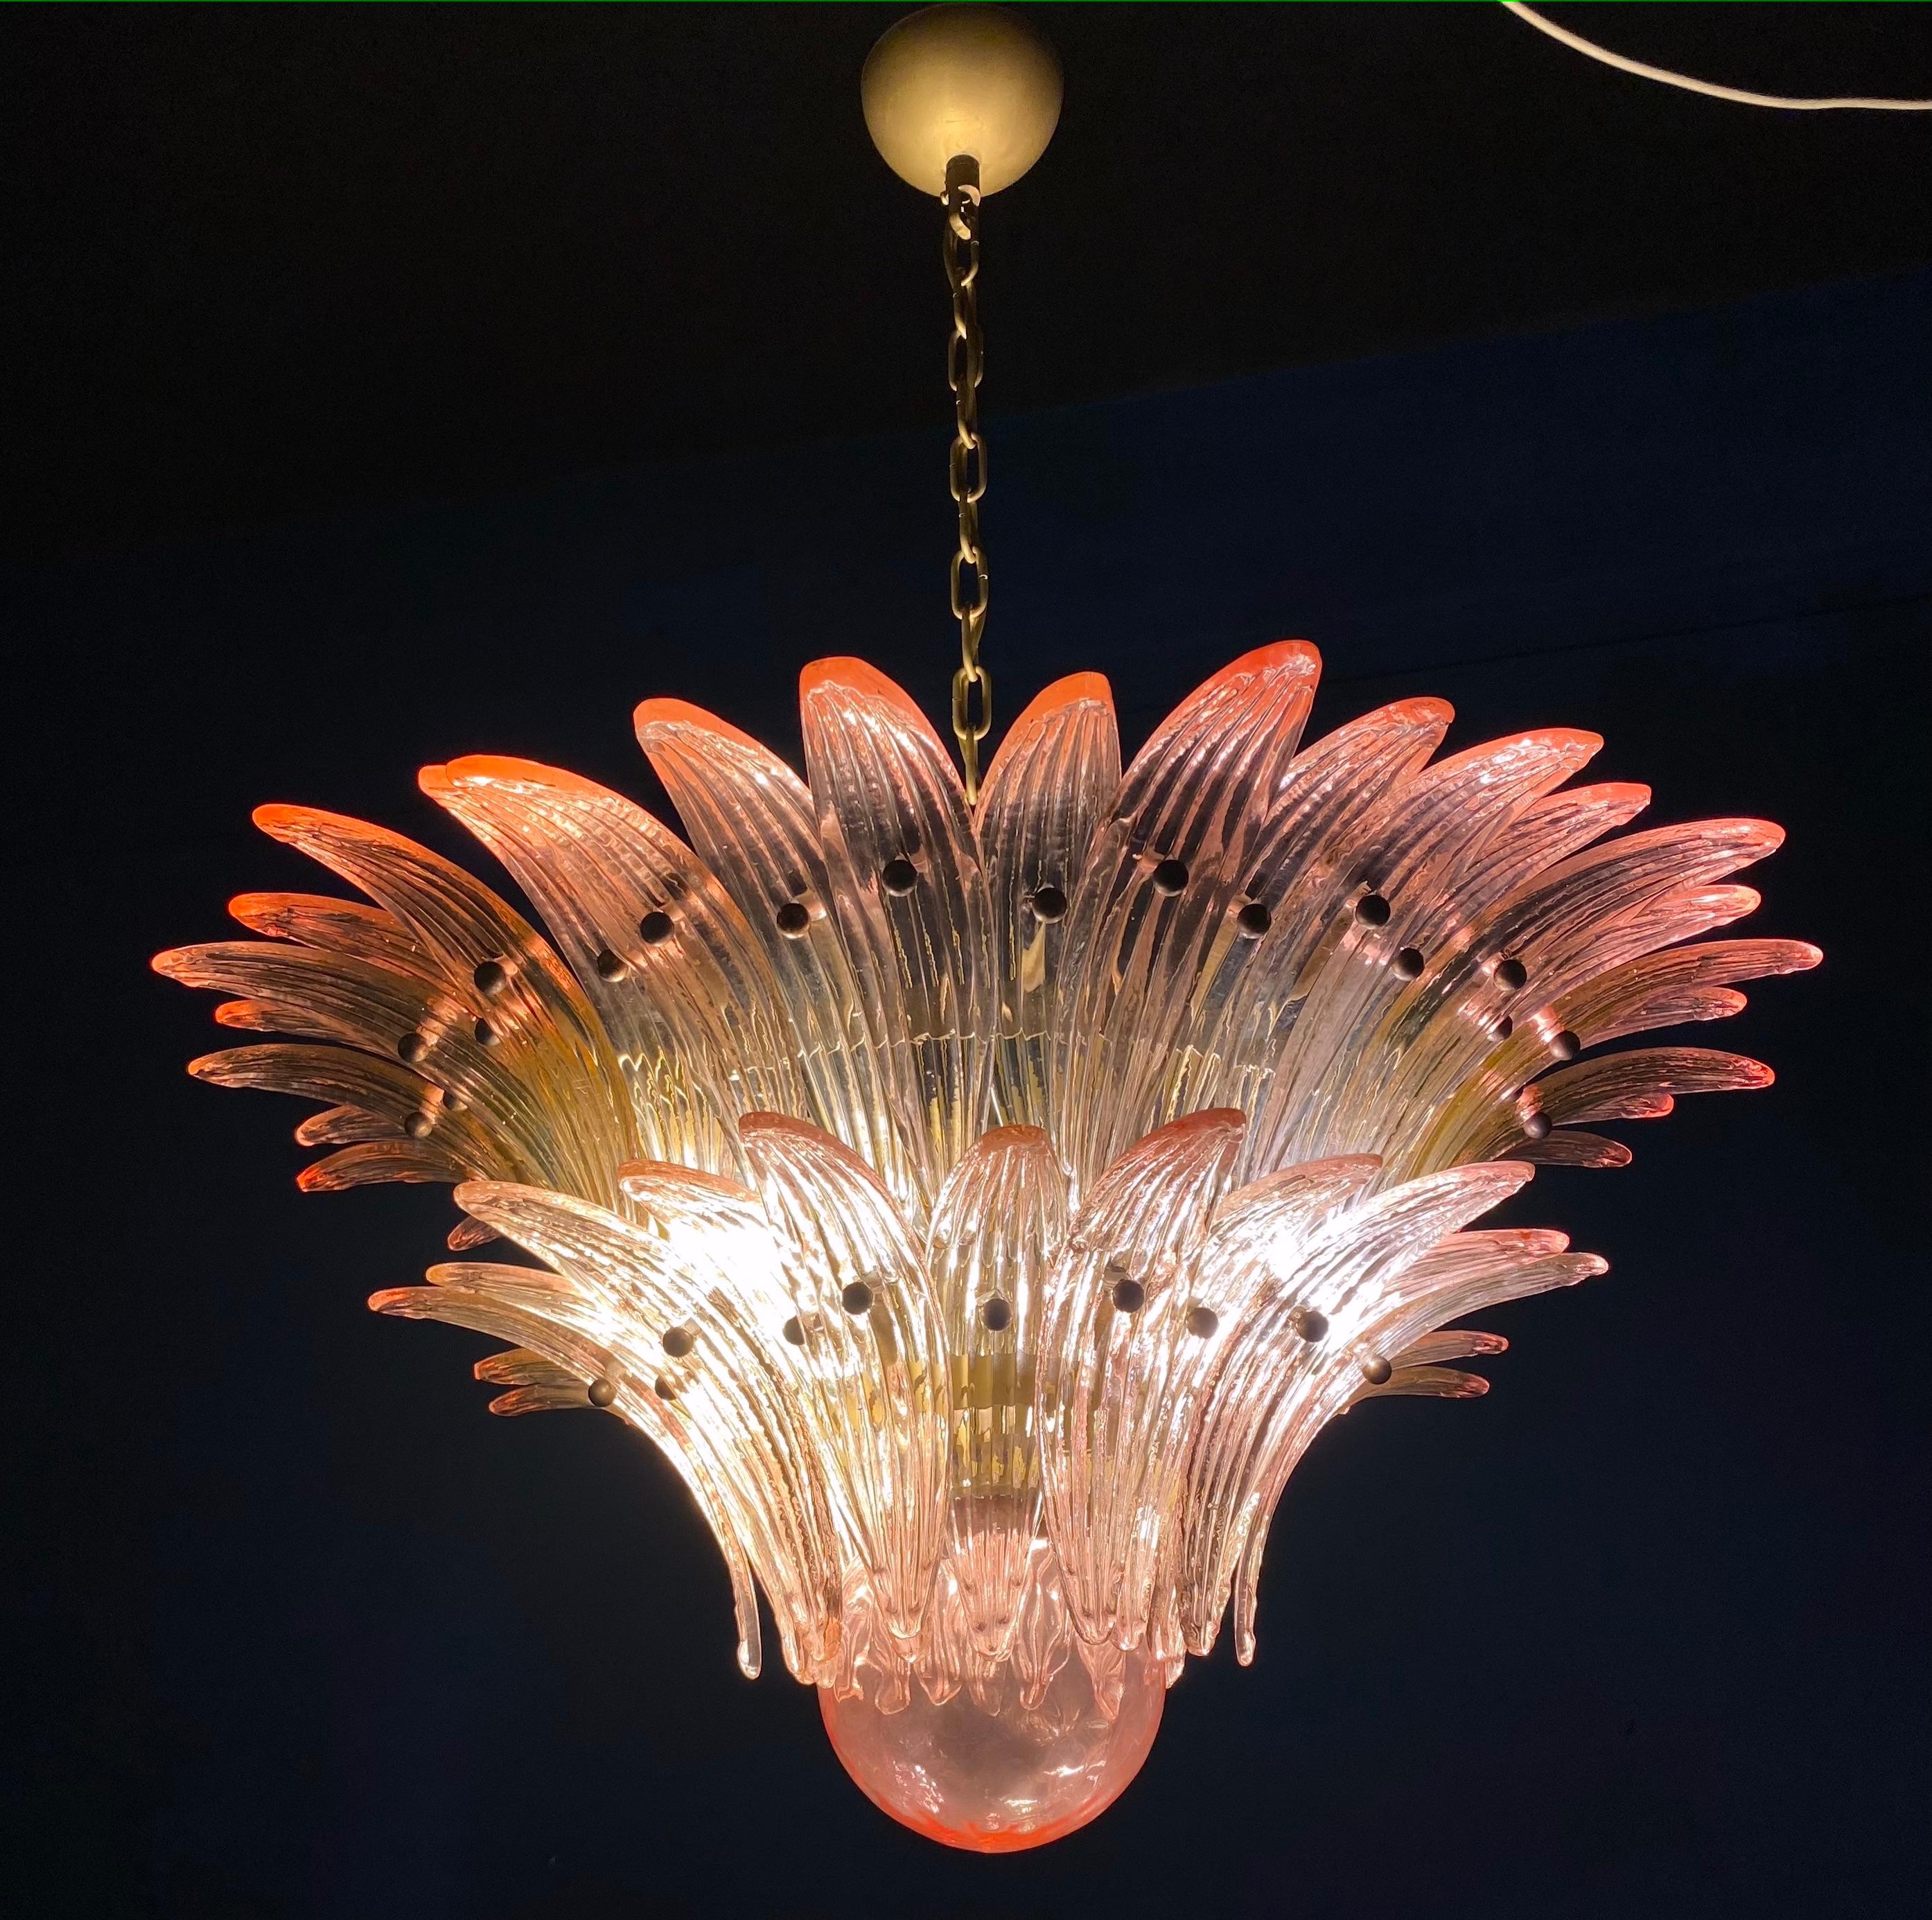 Luxury pink Palmette Murano glass chandelier with a gold metal frame.
Available also a pair and a pair of sconces.
8 light bulbs, E27 dimension
Dimensions: Chandelier 43.30 inches (110 cm), height with chain. Without chain 21.6 inches (55